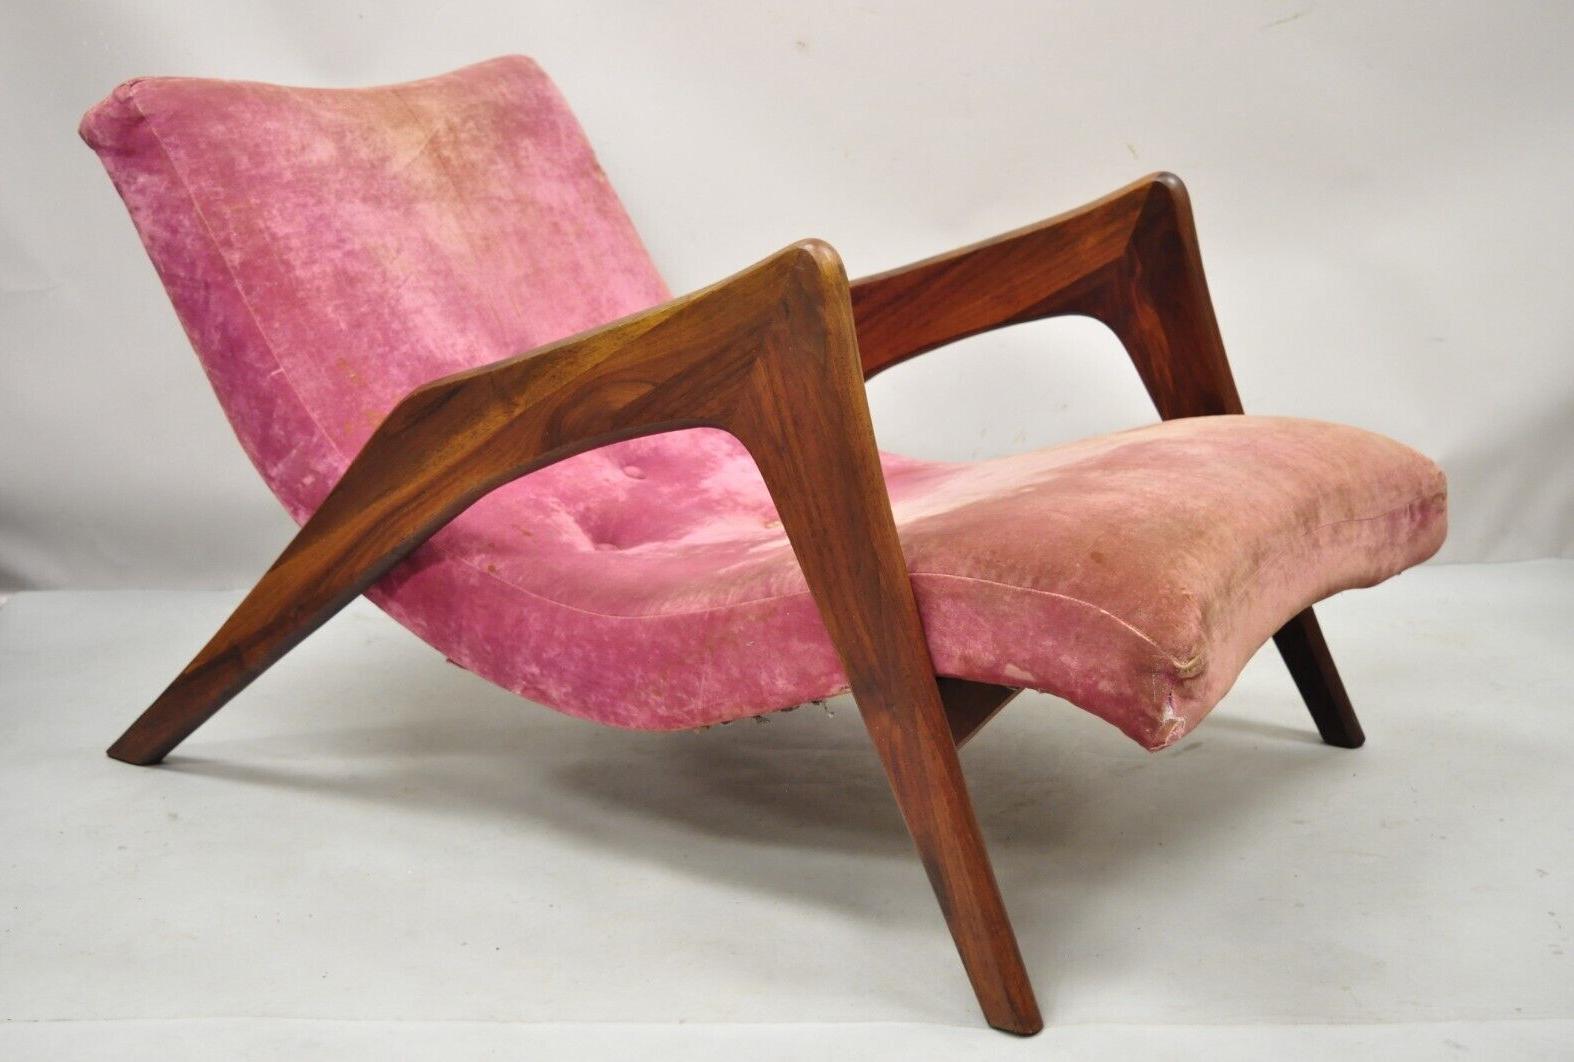 Adrian Pearsall walnut Grasshopper chaise lounge chair mid century. Item features solid wood frame, beautiful wood grain, tapered legs, quality American craftsmanship, sleek sculptural form. Circa mid 20th century. Measurements: 28.5